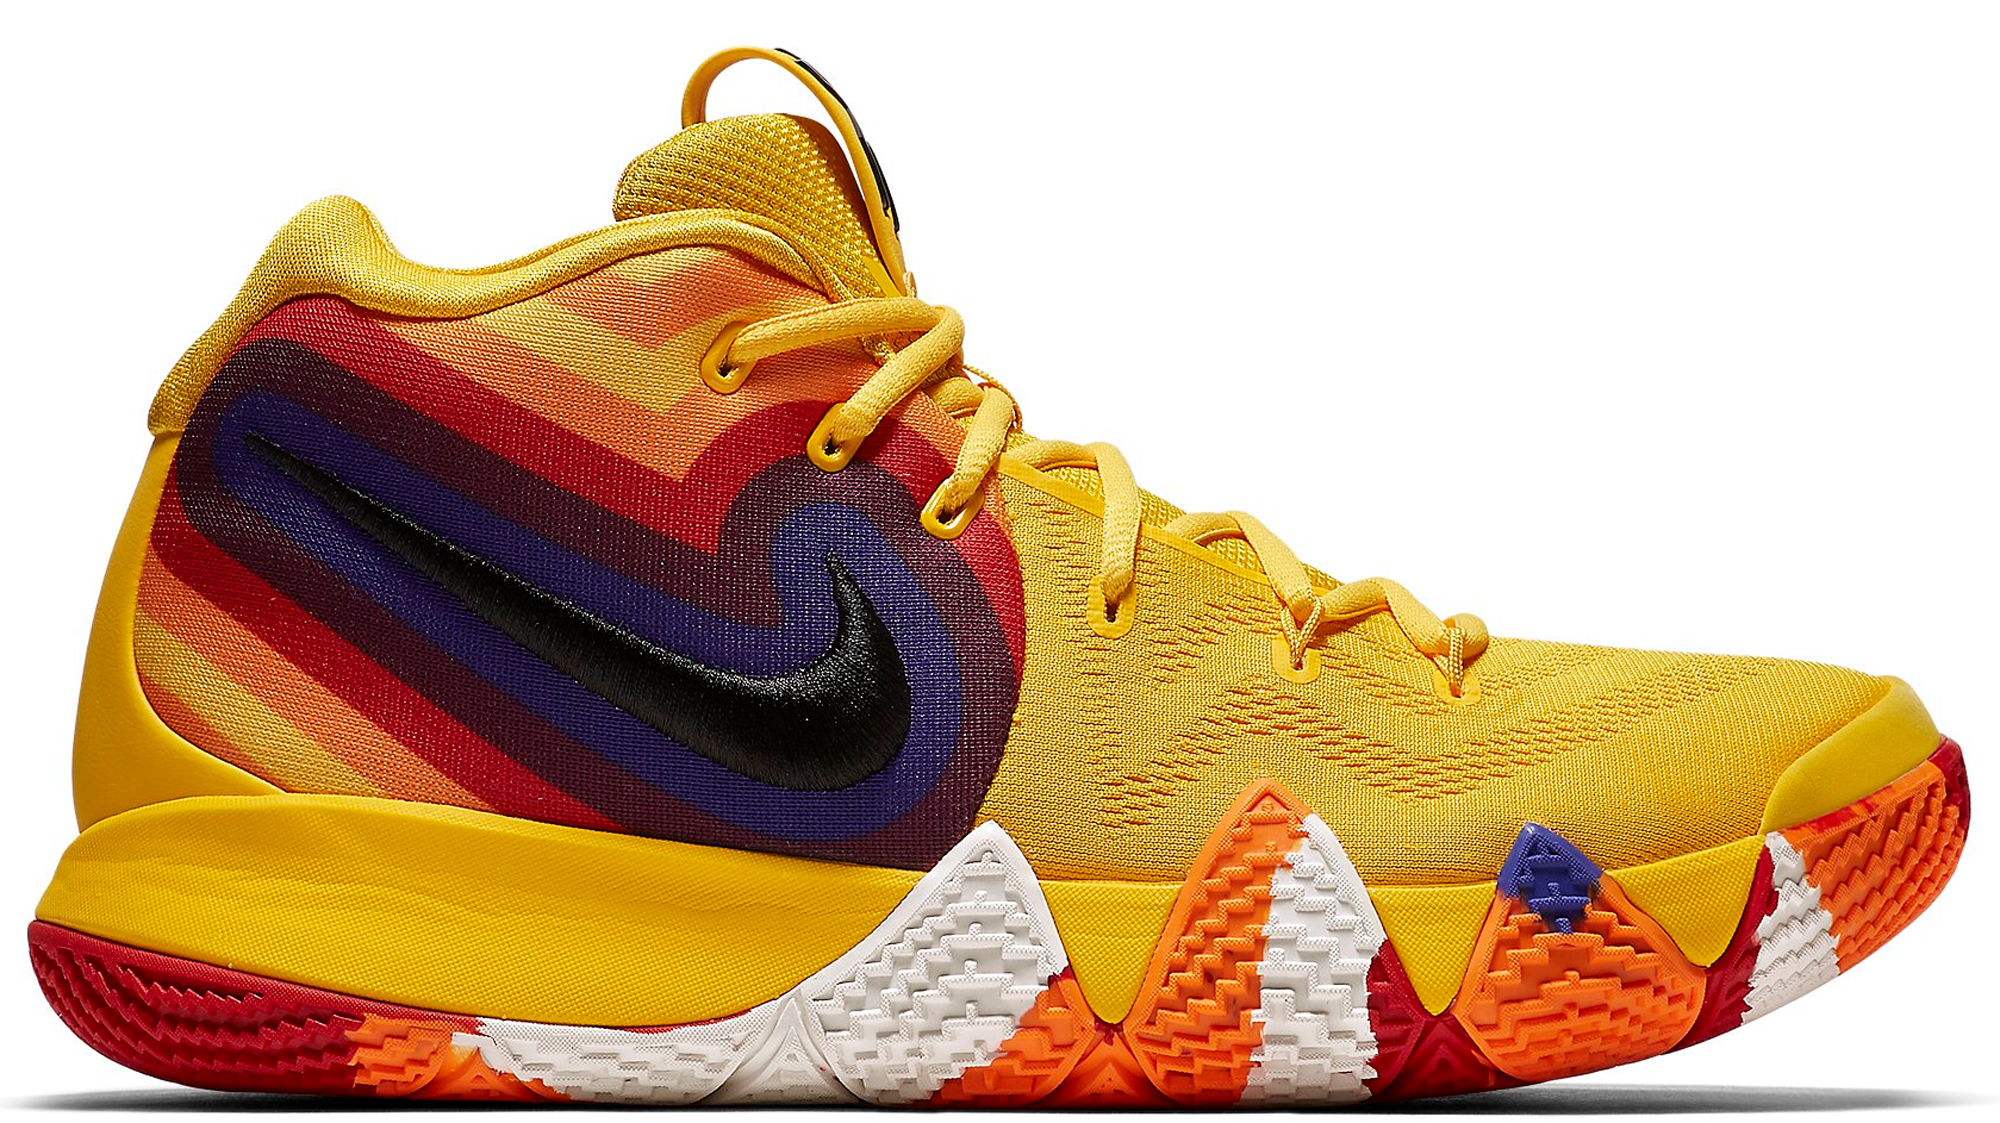 kyrie 4s shoes